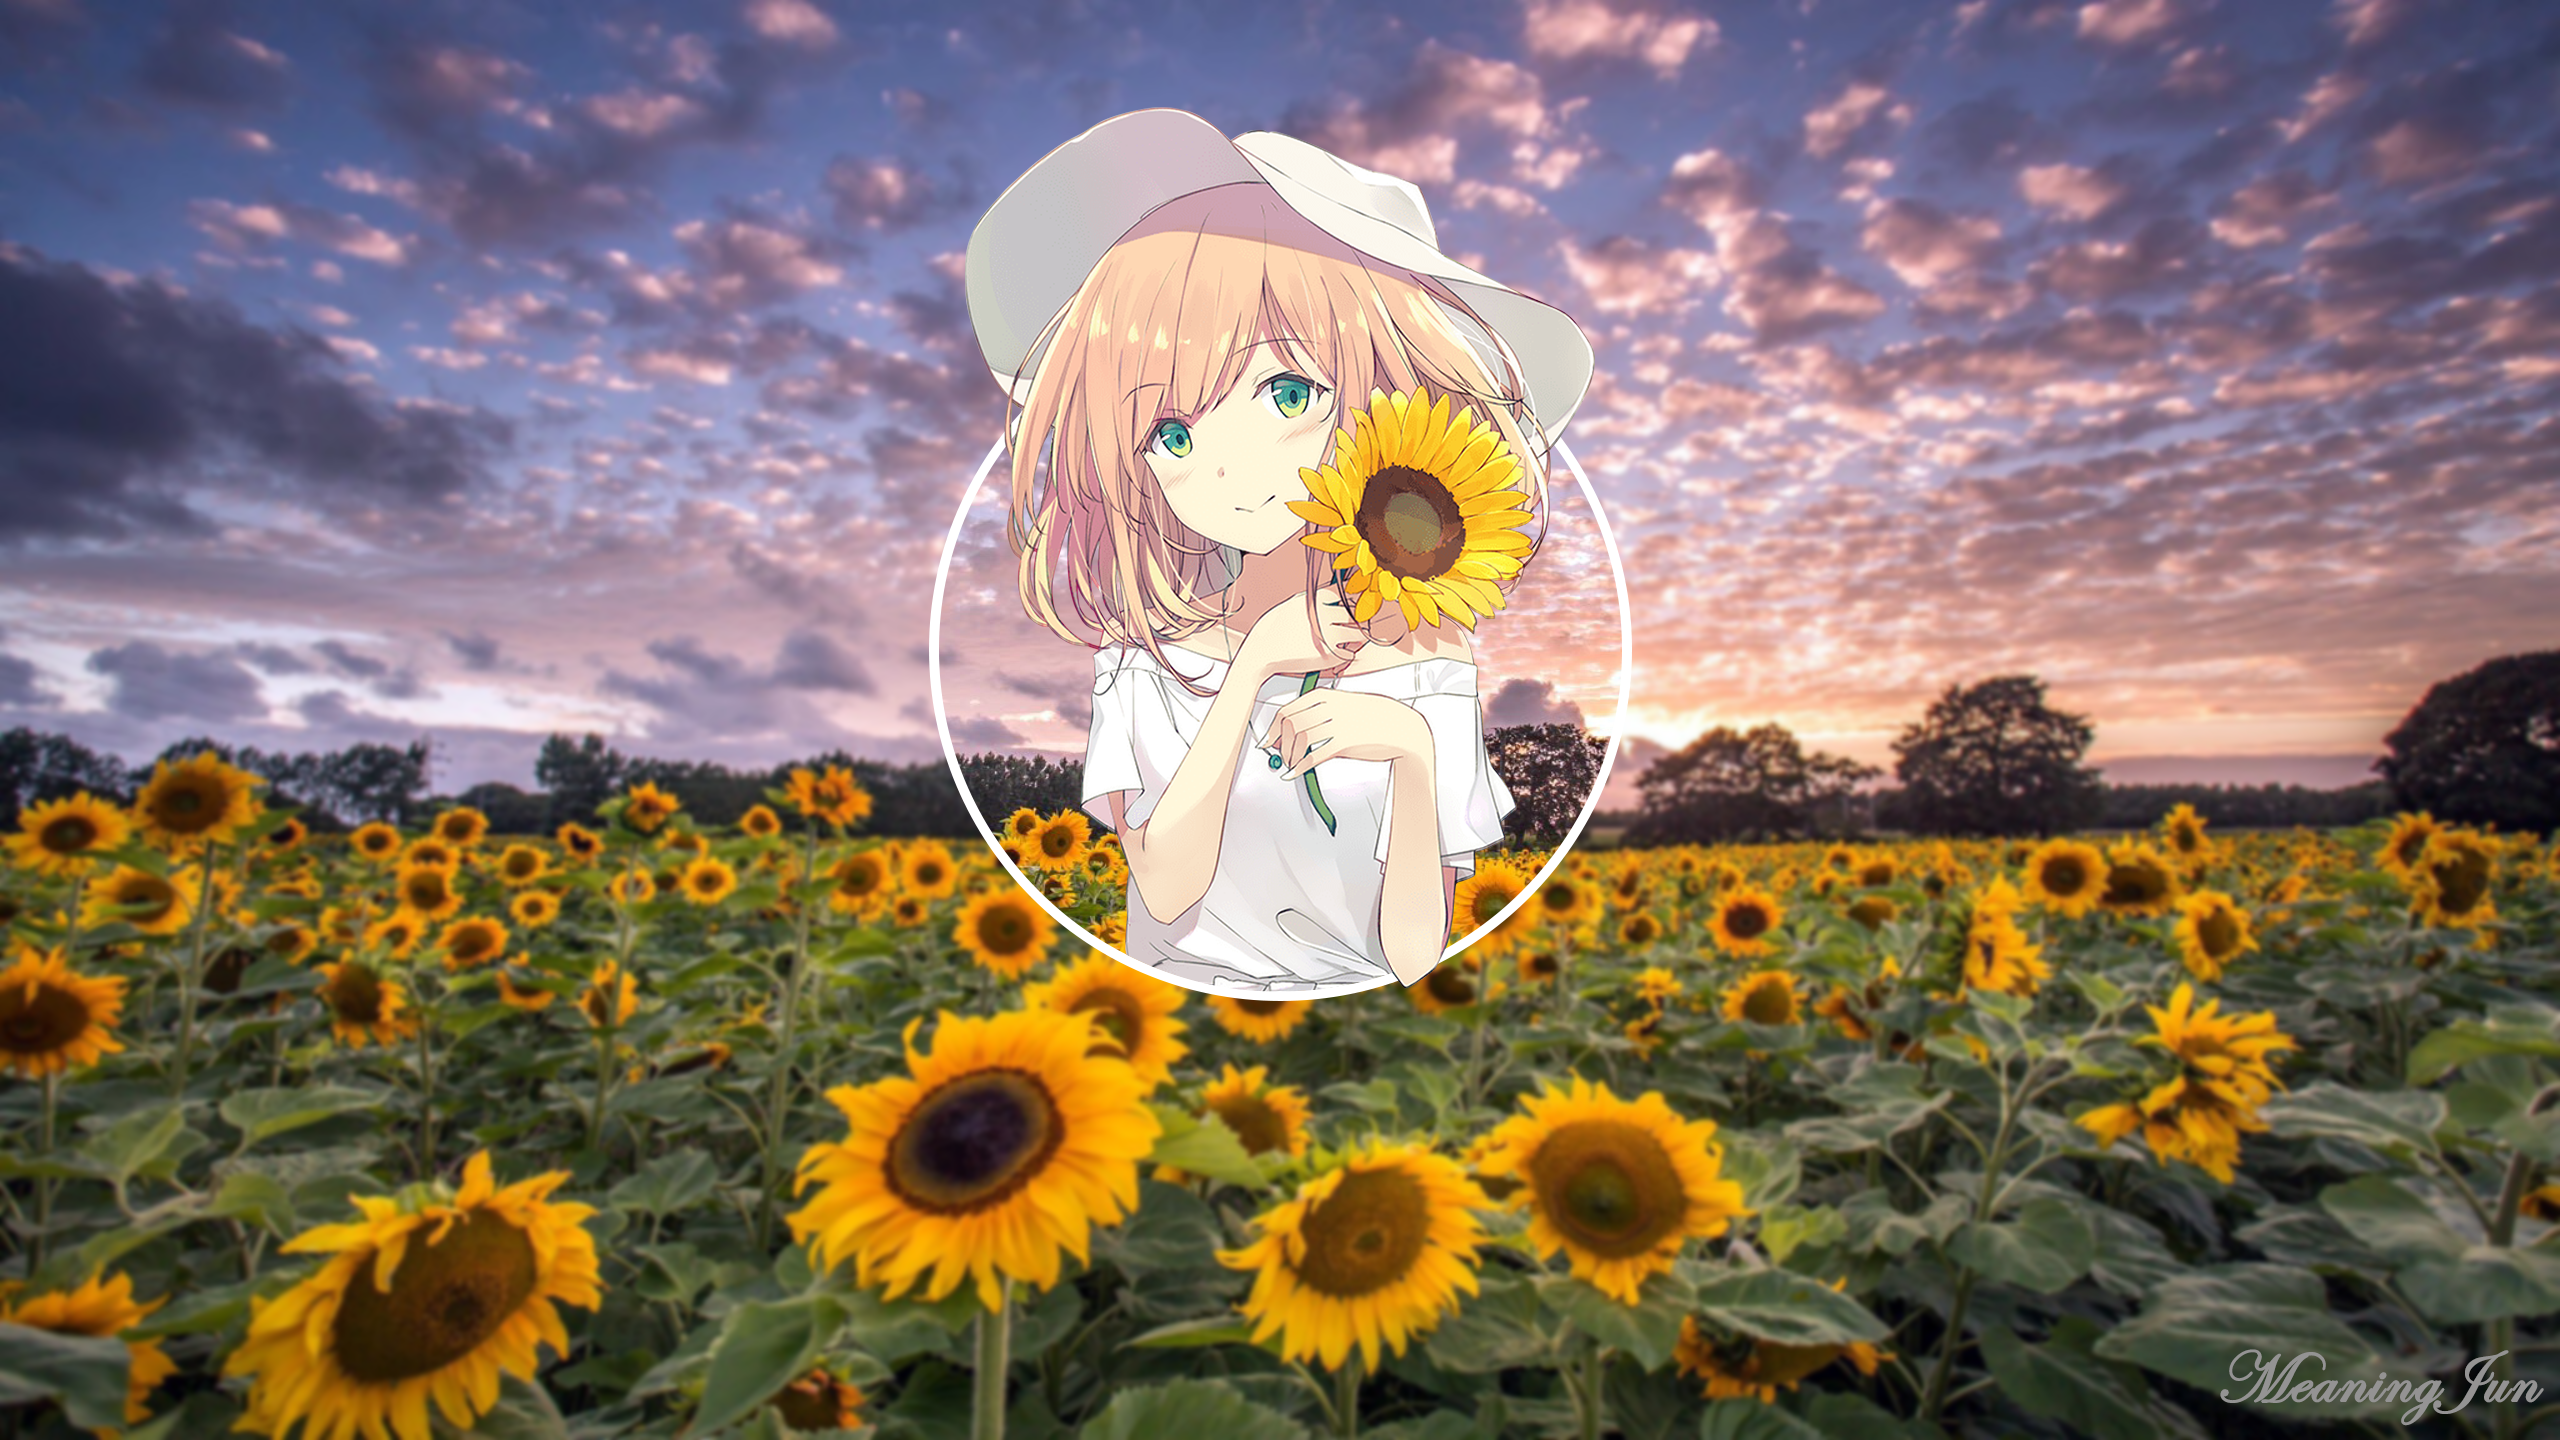 Wallpaper / 2D, Anime Girls, Anime, Picture In Picture, MeaningJun, Sunflowers, Sunset Free Download